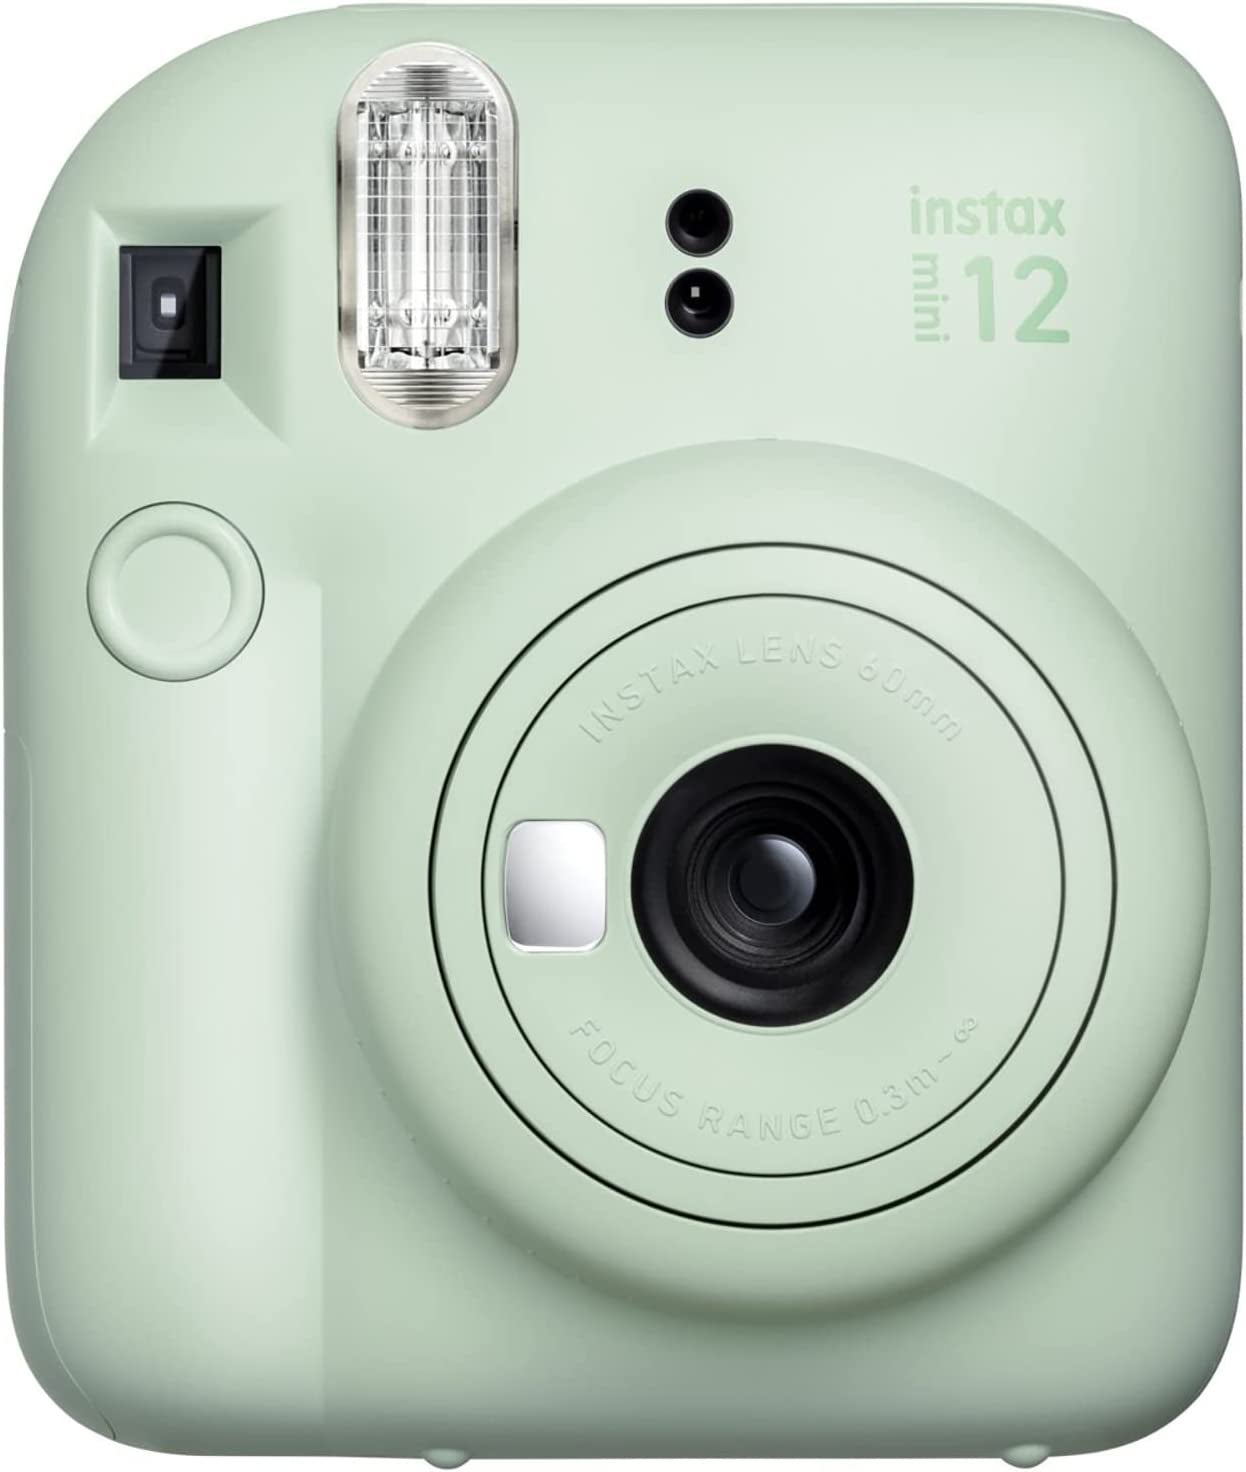 Front of the Fujifilm Instax Mini 12 instant camera in mint green.